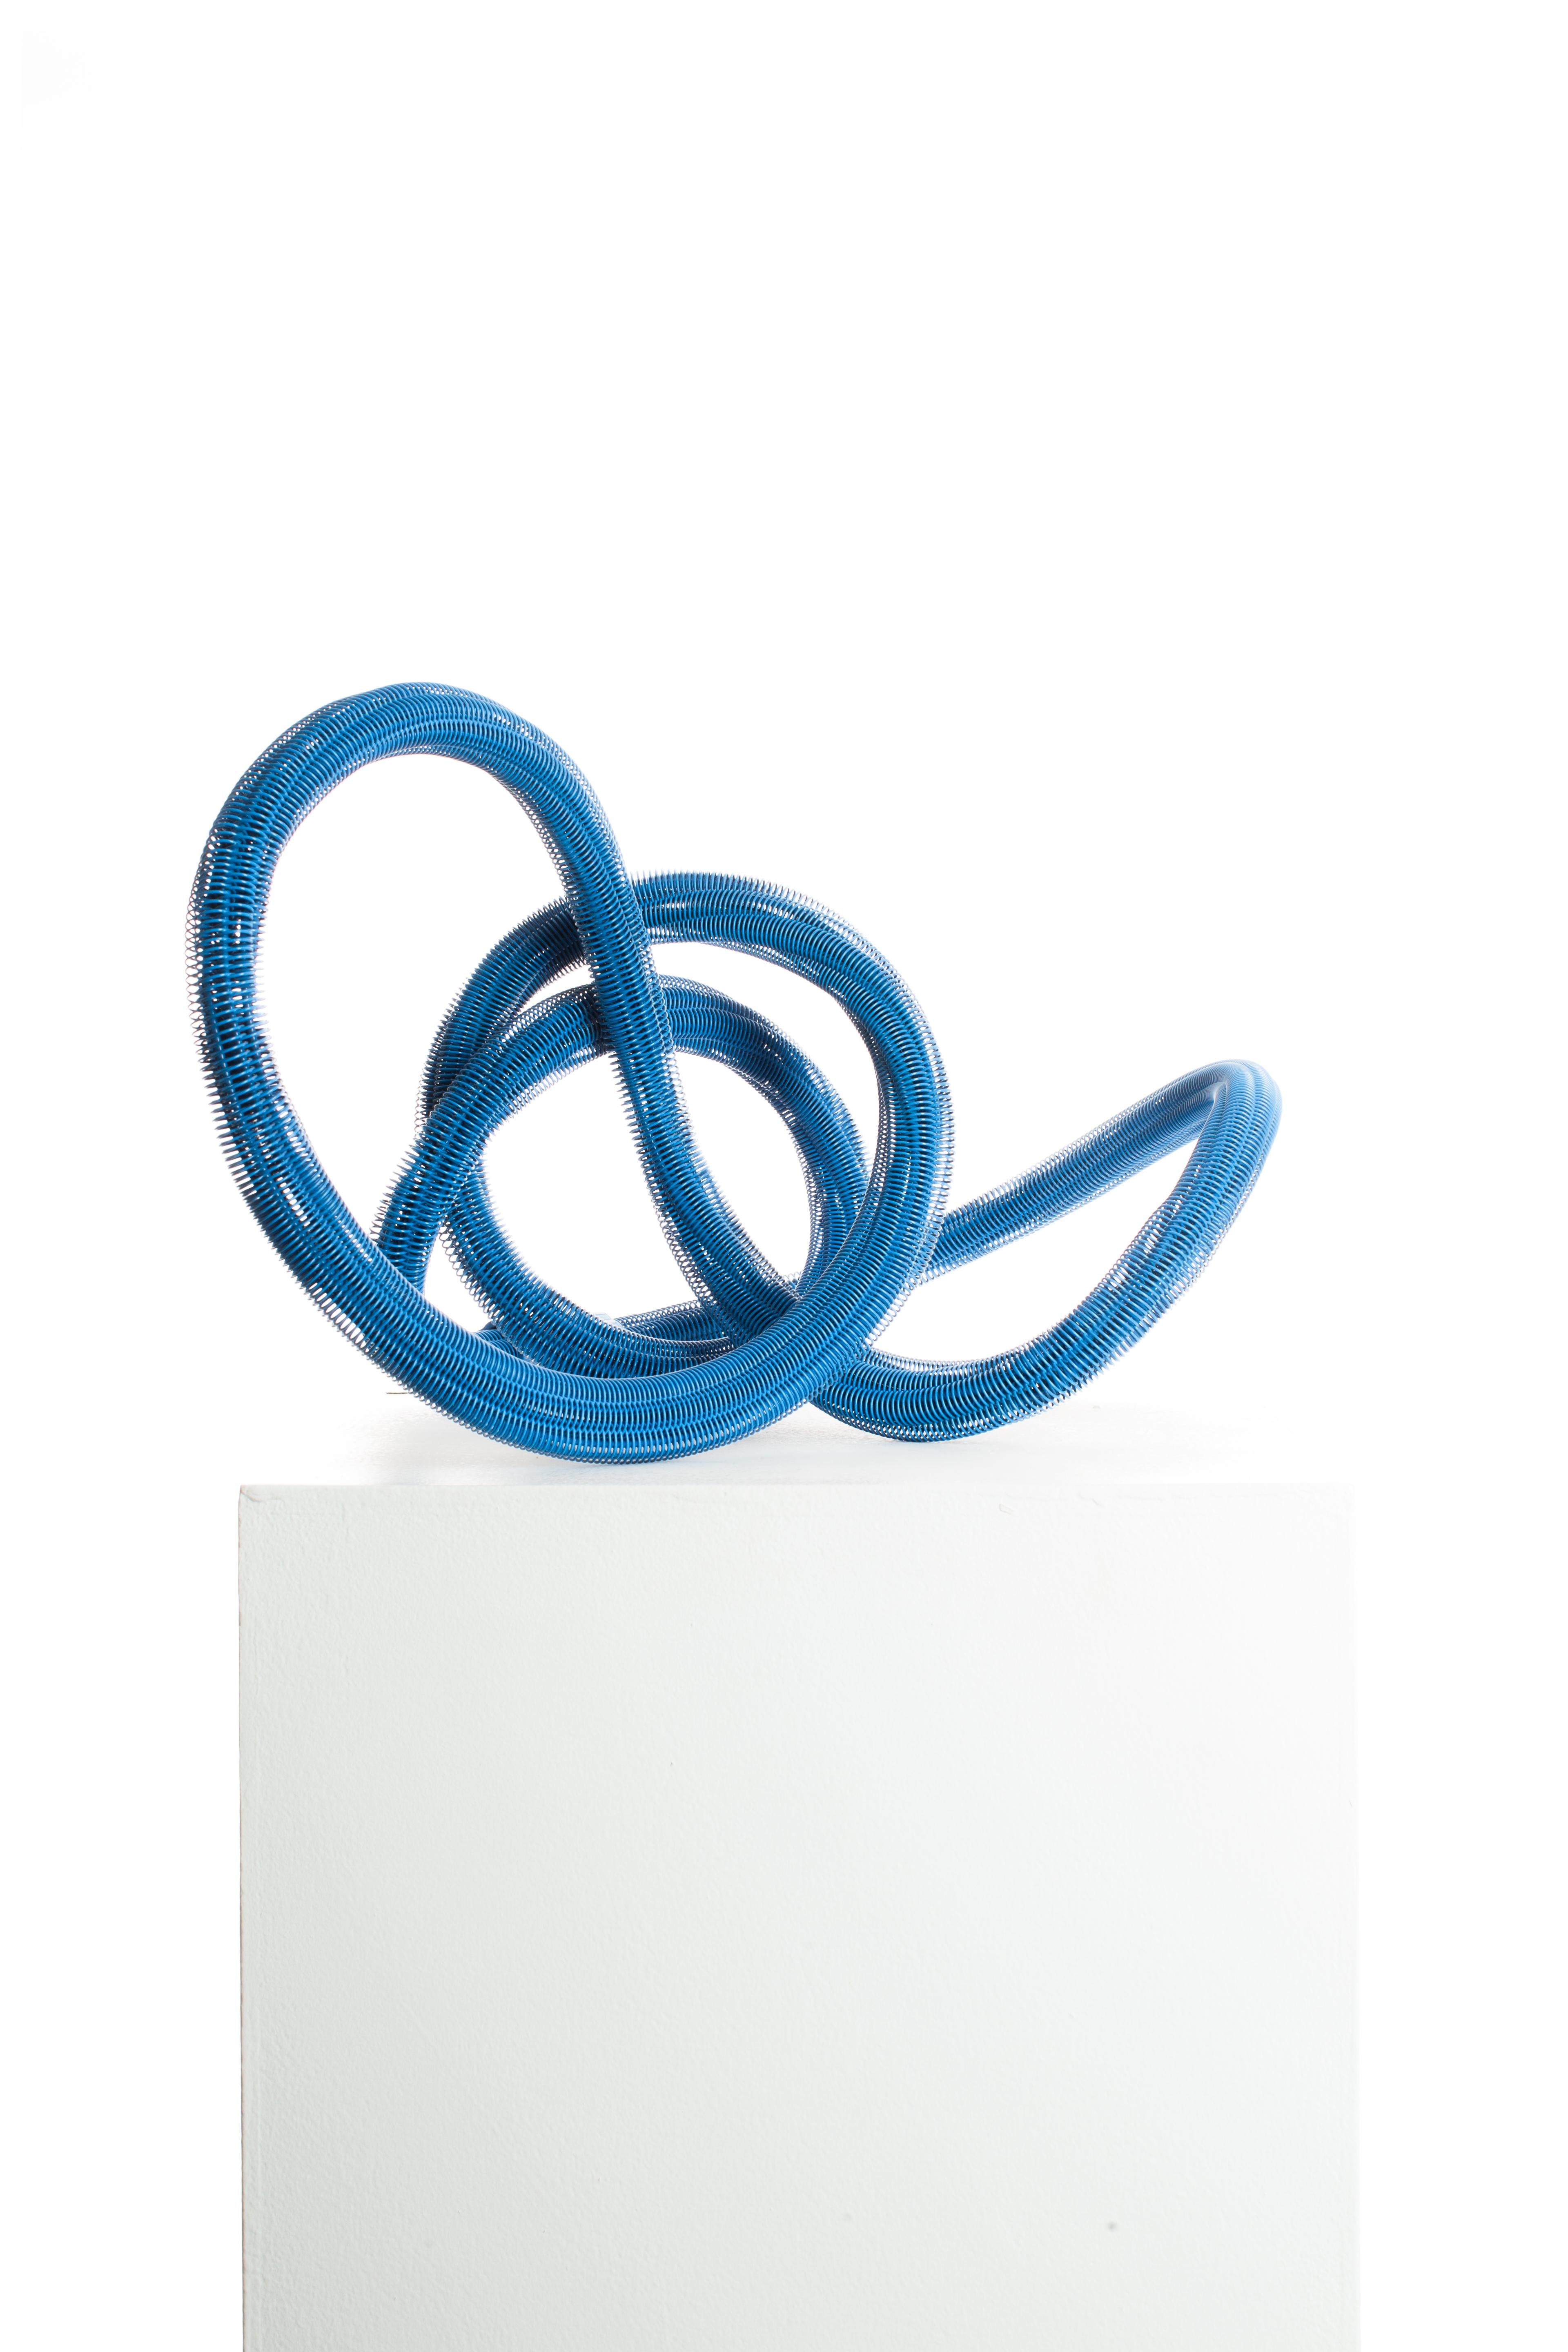 Compact Whisp 001
Blue
1/1
Spring Steel, Brass, Powder Coating 
60cm x 40cm x 30cm
3.2Kg

Whisps are meticulously constructed organic sculptural expressions. These expressions are symbolic of what the mind feels like to artist Driaan Claassen as he